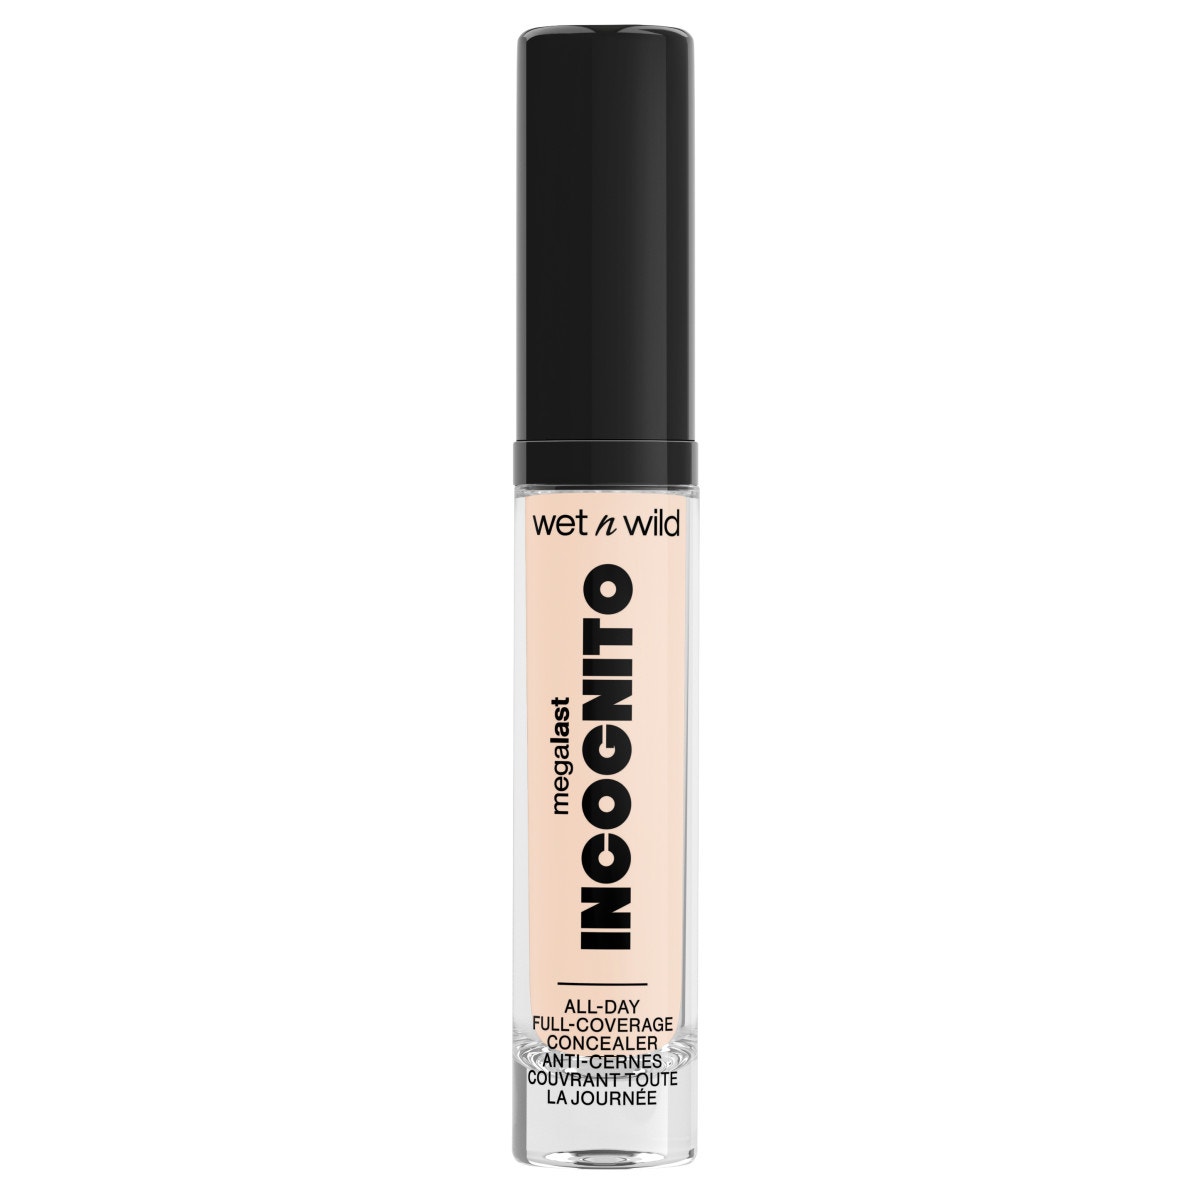  wet n wild Mega Last Incognito All-Day Full Coverage